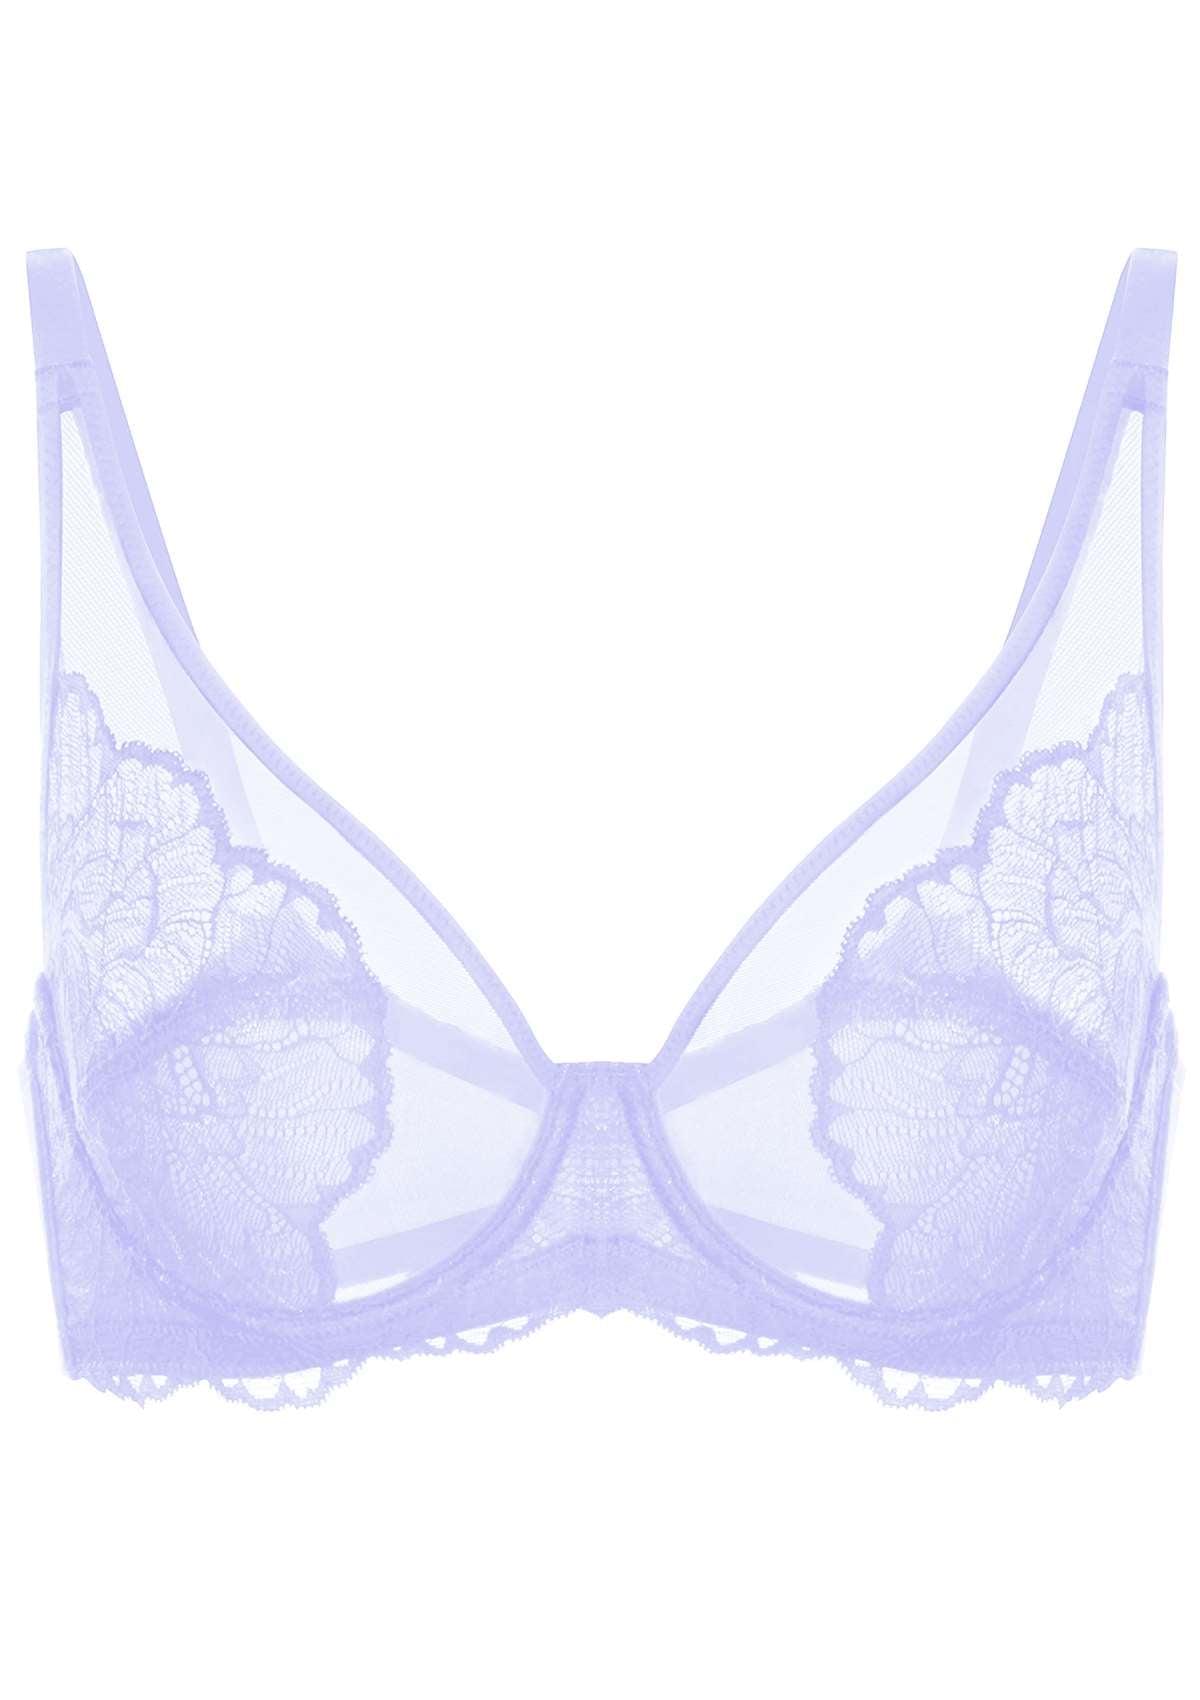 HSIA Blossom Transparent Lace Bra: Plus Size Wired Back Smoothing Bra - Light Purple / 46 / C